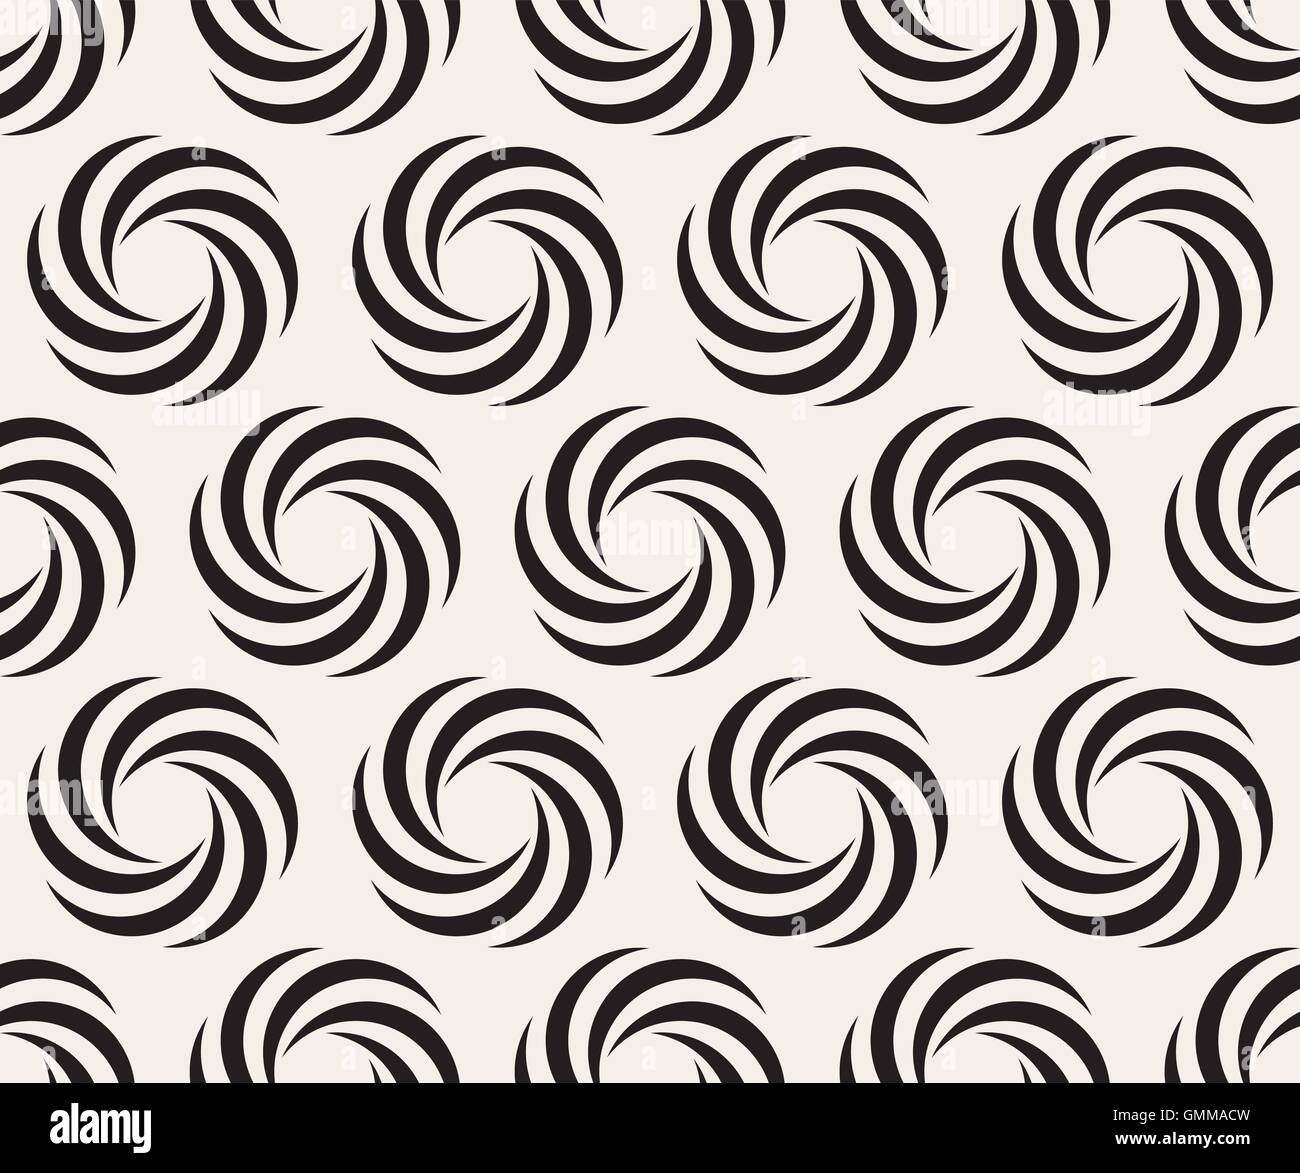 Vector Seamless Black and White Spiral Geometry Circle Optical Illusion Pattern Stock Vector